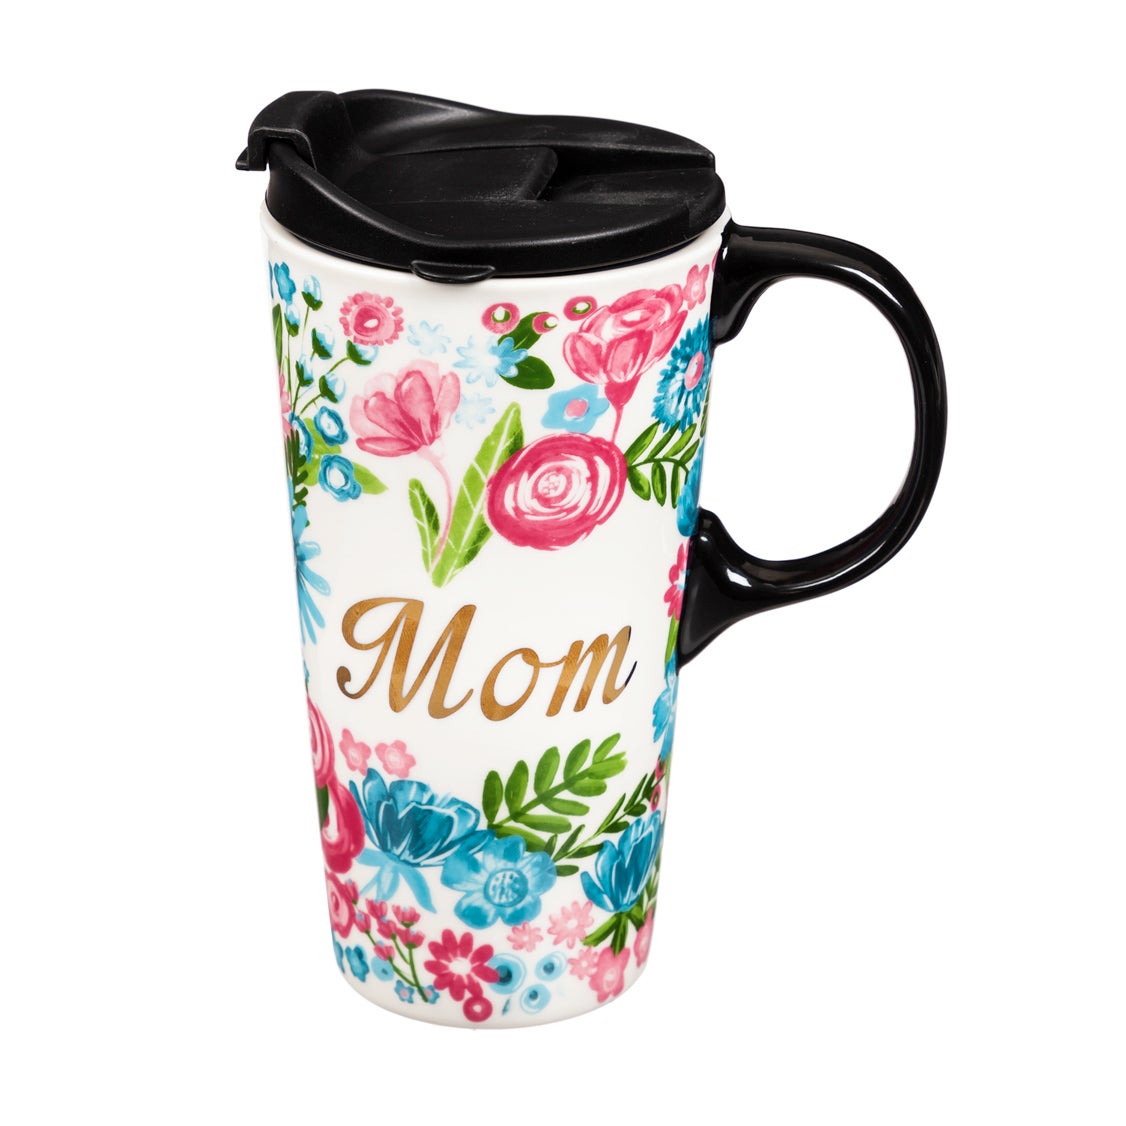 Evergreen Ceramic Travel Cup With Box, Desert Cacti Floral- 17 Oz